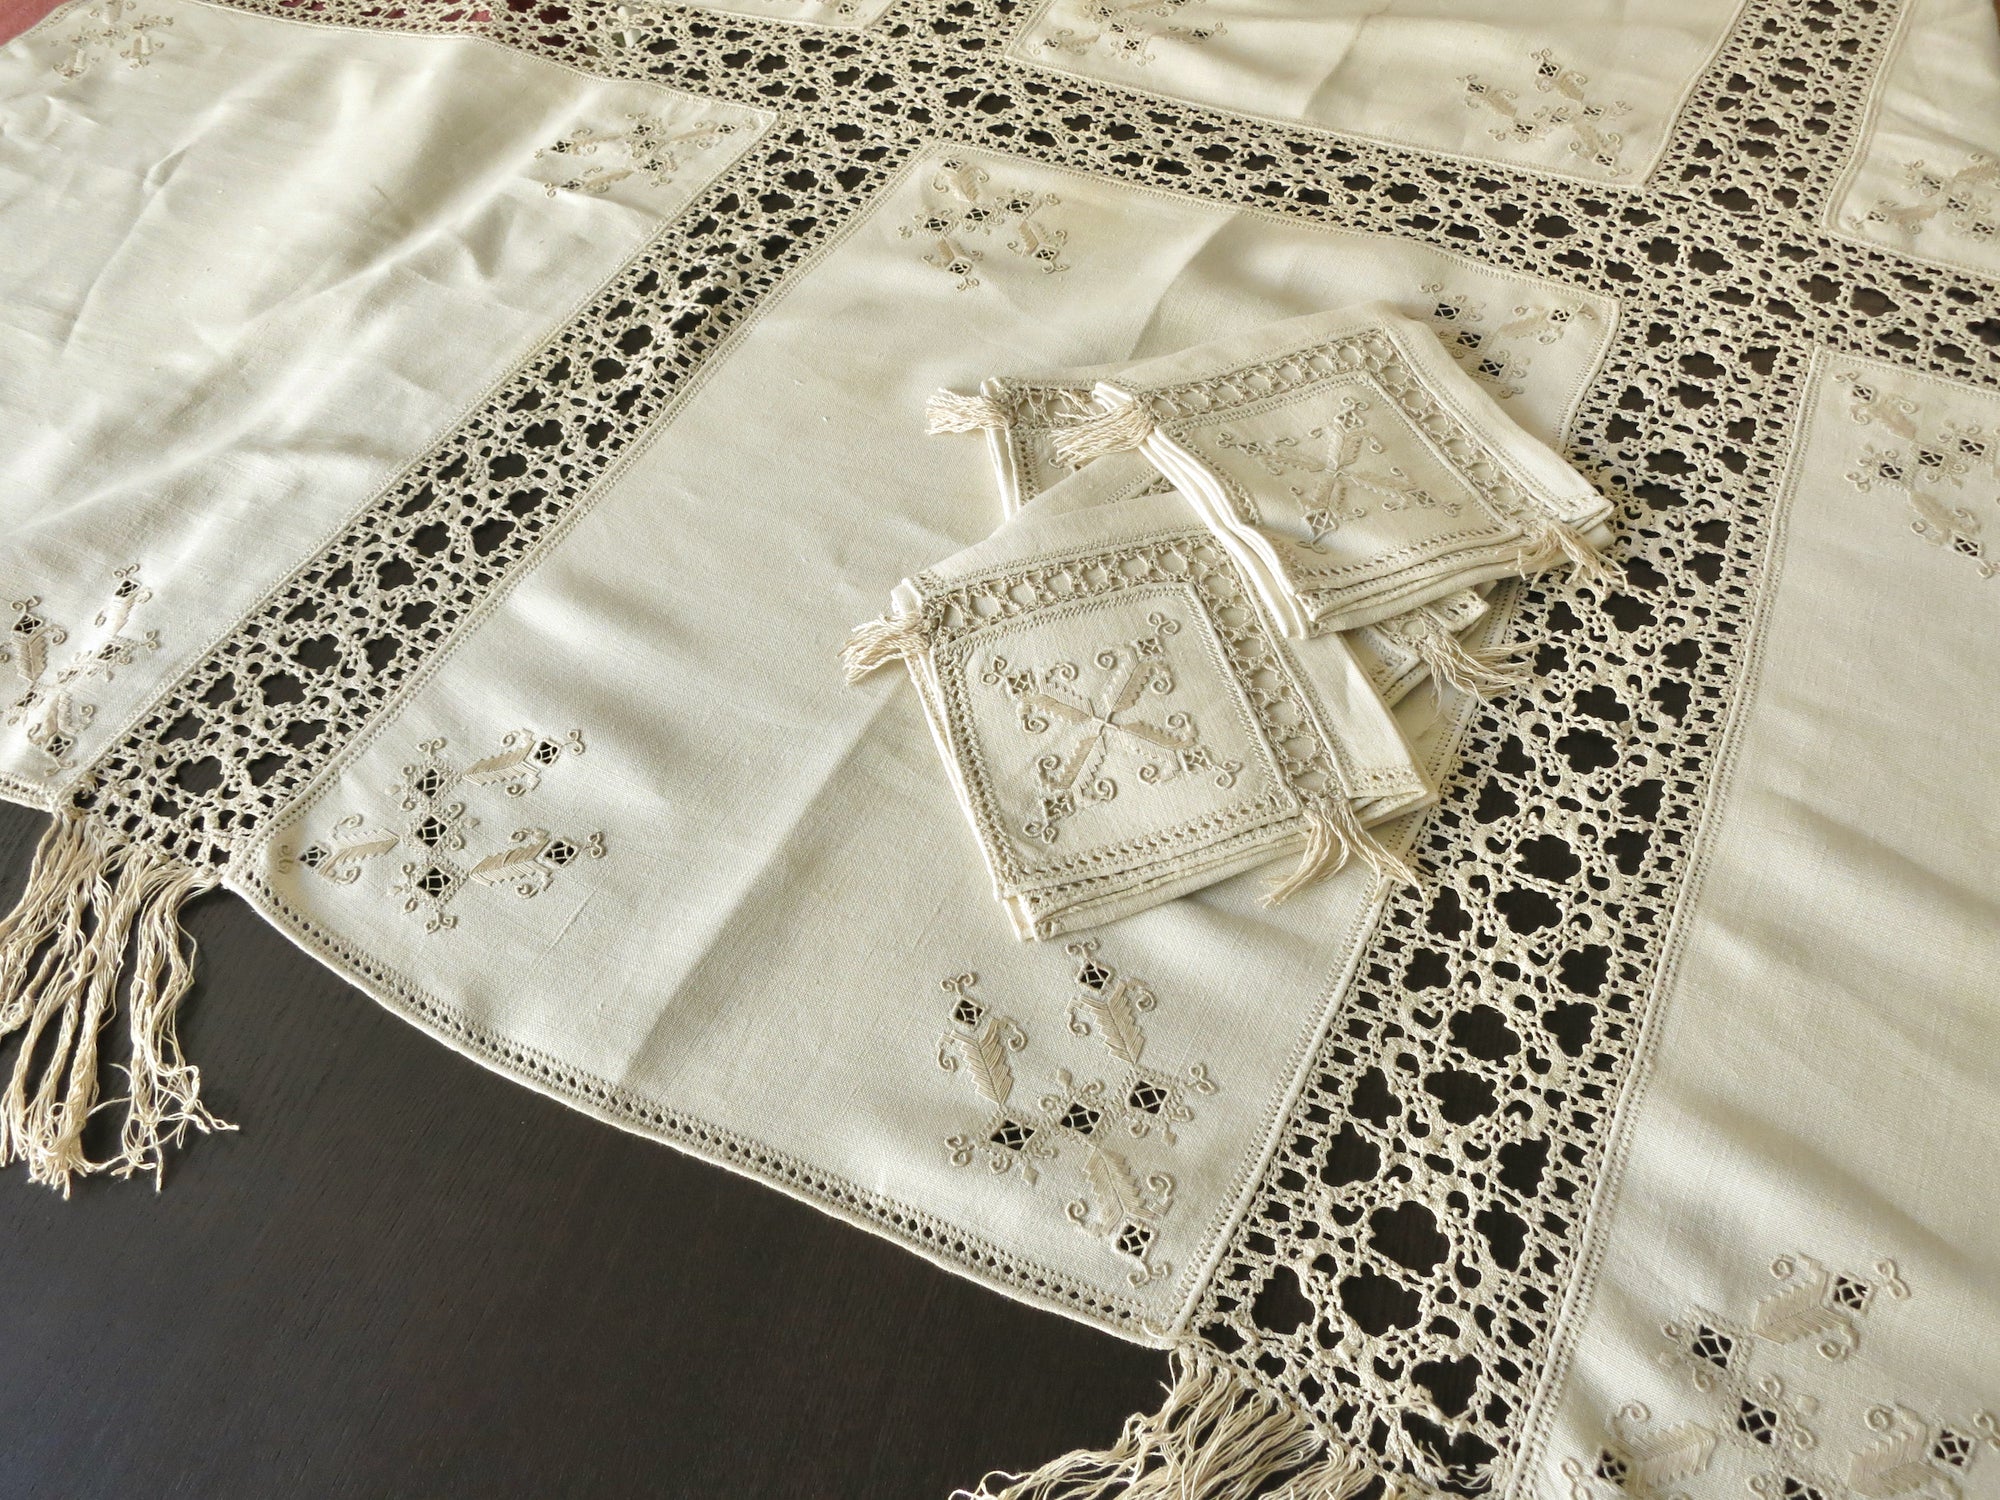 Fringed Antique Italian Linen & Lace Tablecloth 12 Napkins 70x120"